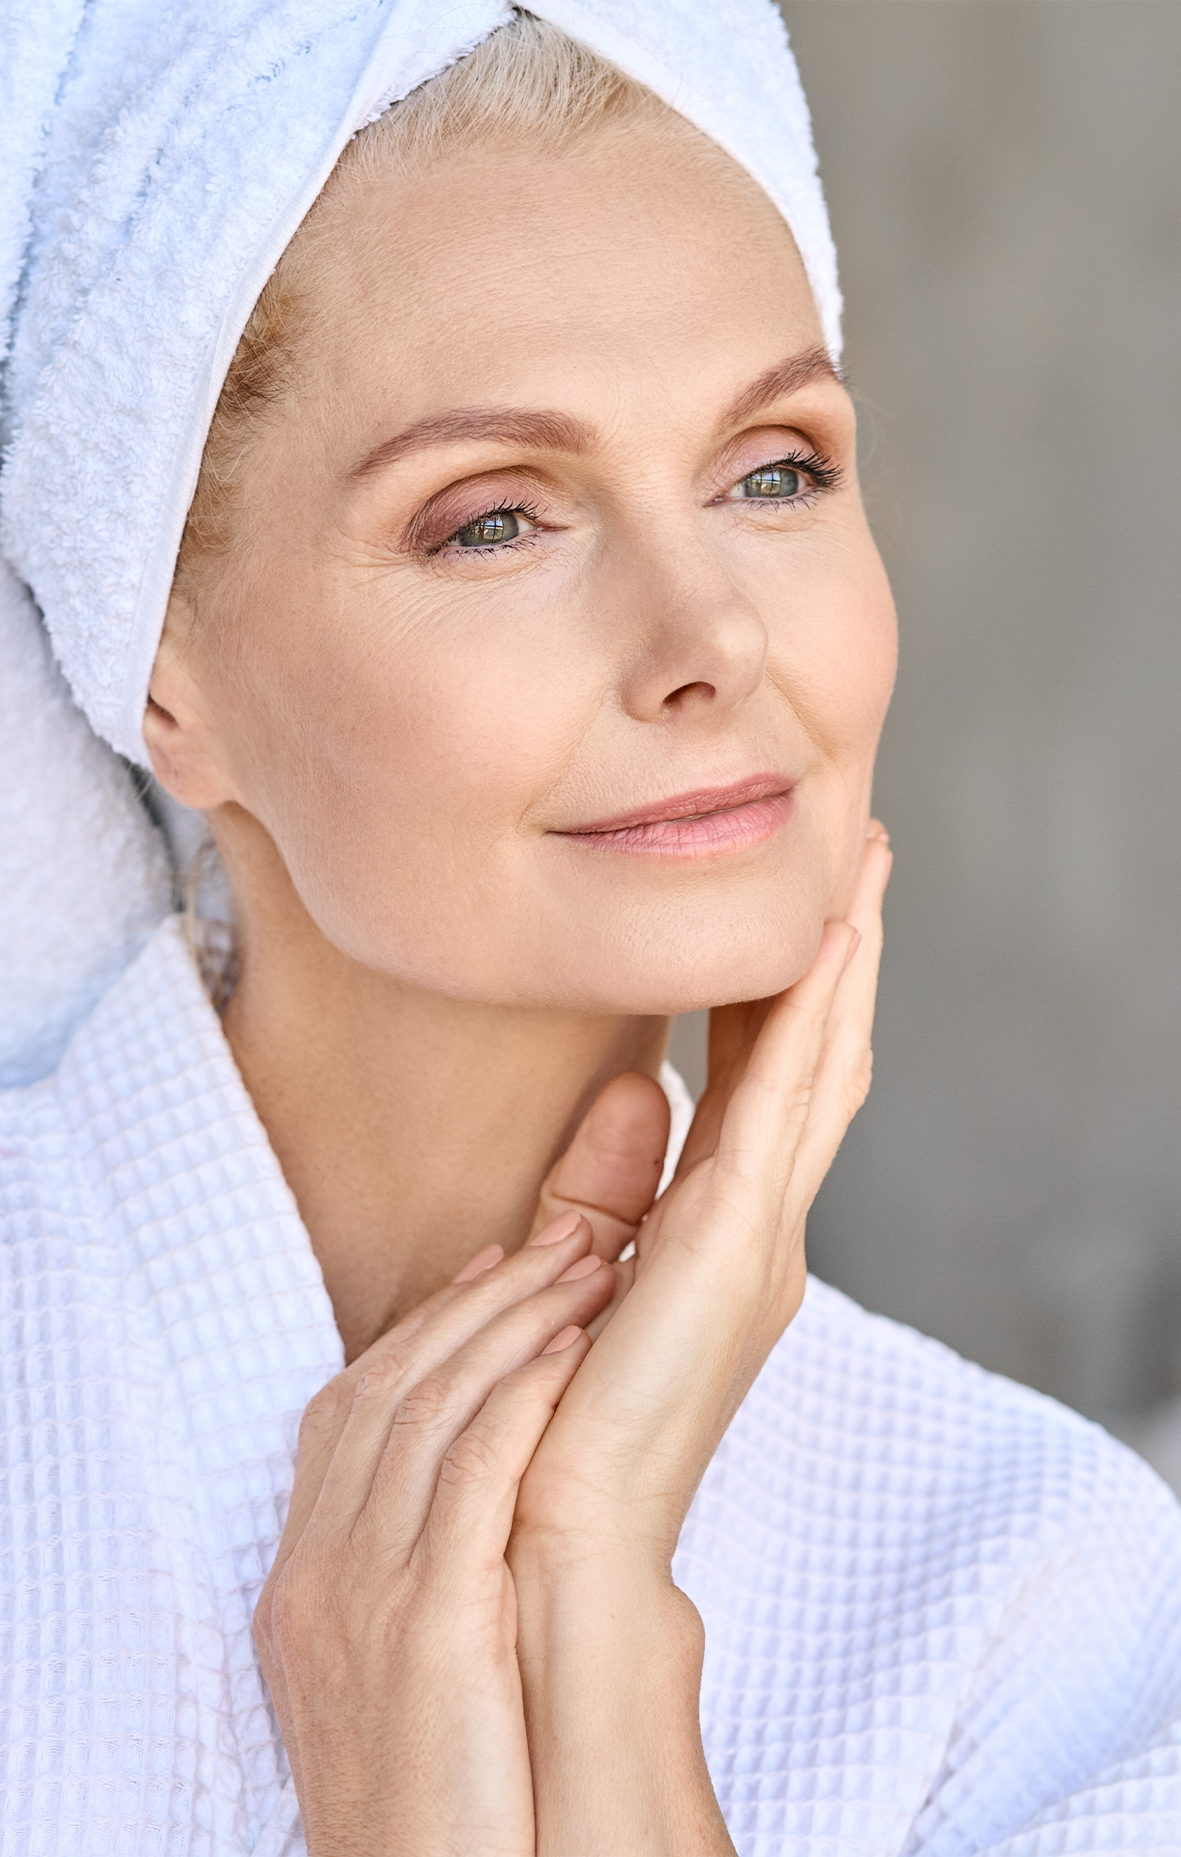 Top Skincare for Wrinkles and Mature Skin